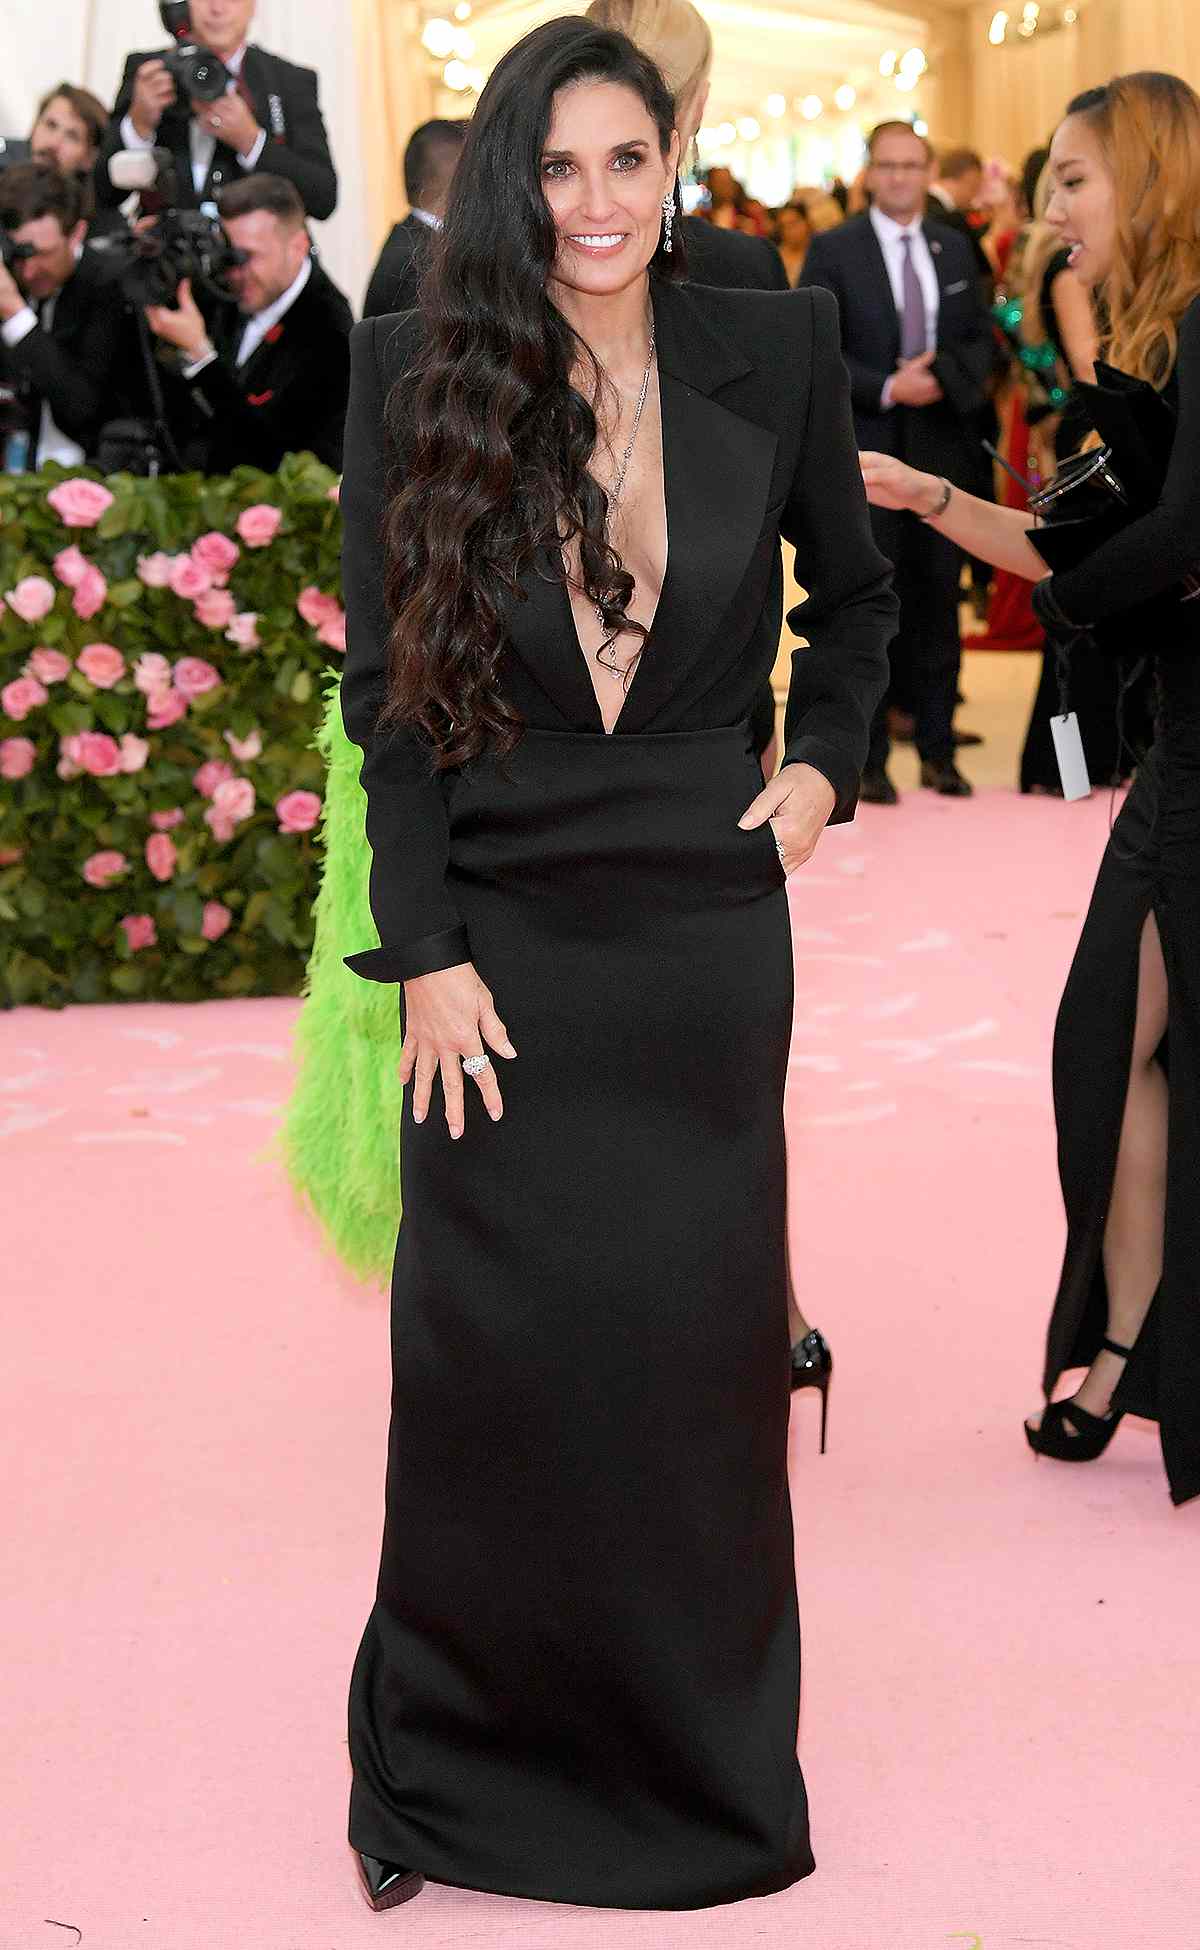 NEW YORK, NEW YORK - MAY 06: Demi Moore attends The 2019 Met Gala Celebrating Camp: Notes on Fashion at Metropolitan Museum of Art on May 06, 2019 in New York City. (Photo by Neilson Barnard/Getty Images)